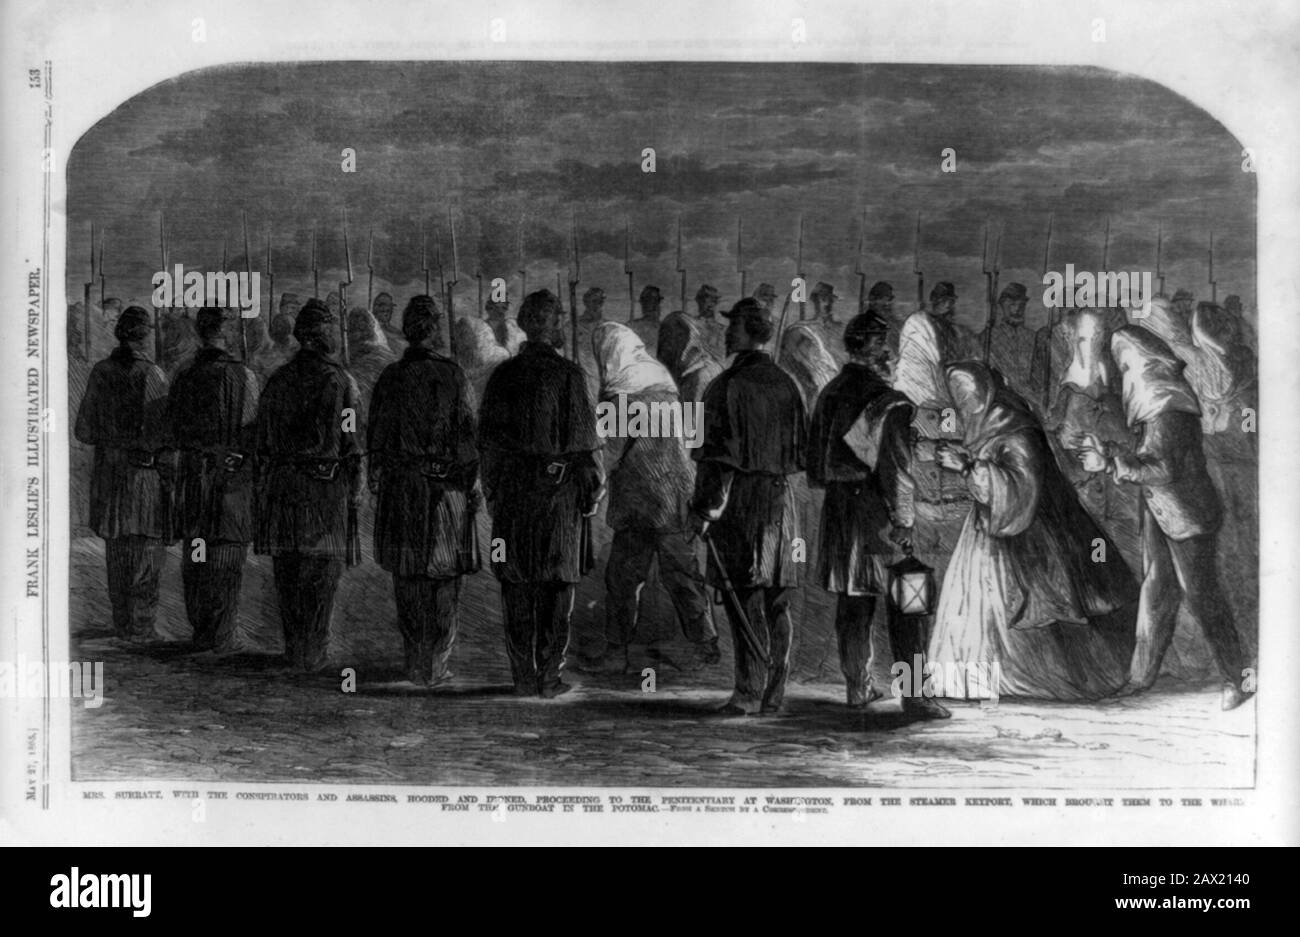 1865, USA: Mrs. Surratt with the conspirators and assassins, hooded and ironed proceeding to the penitentiary at Washington, from the steamer Keyport which brought them to the wharf from the gunboat in the Potomac . Engraving illustration from the magazine FRANK  LESLIEE'S ILLUSTRATED NEWSPAPER , may 27 , 1865 .   MARY SURRATT ( 1820 - 1865 ) one of the Lincoln conspirators sentenced to death .  The U.S.A. President ABRAHAM LINCOLN ( 1809 - 1865 ).  Mary Elizabeth Jenkins Surratt ( May 1823 – July 7, 1865 ) was an American boarding house owner who was convicted of taking part in the conspiracy Stock Photo